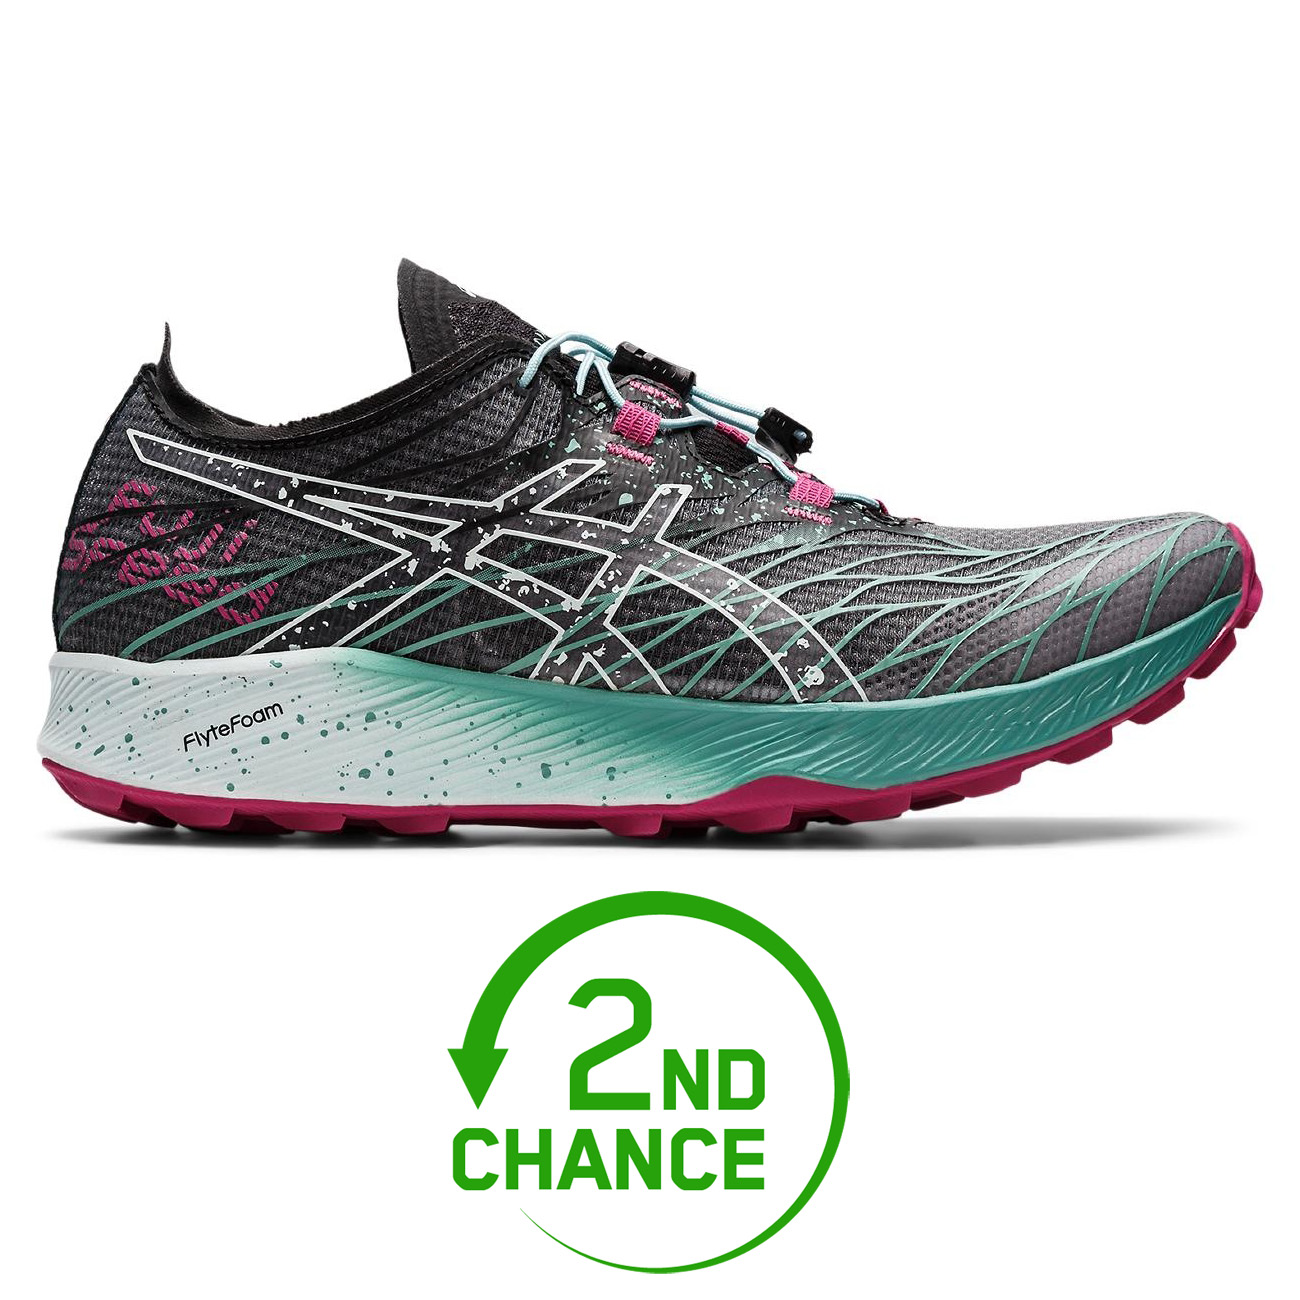 Picture of asics Fujispeed Trail Running Shoes Women - black/soothing sea - 2nd Choice